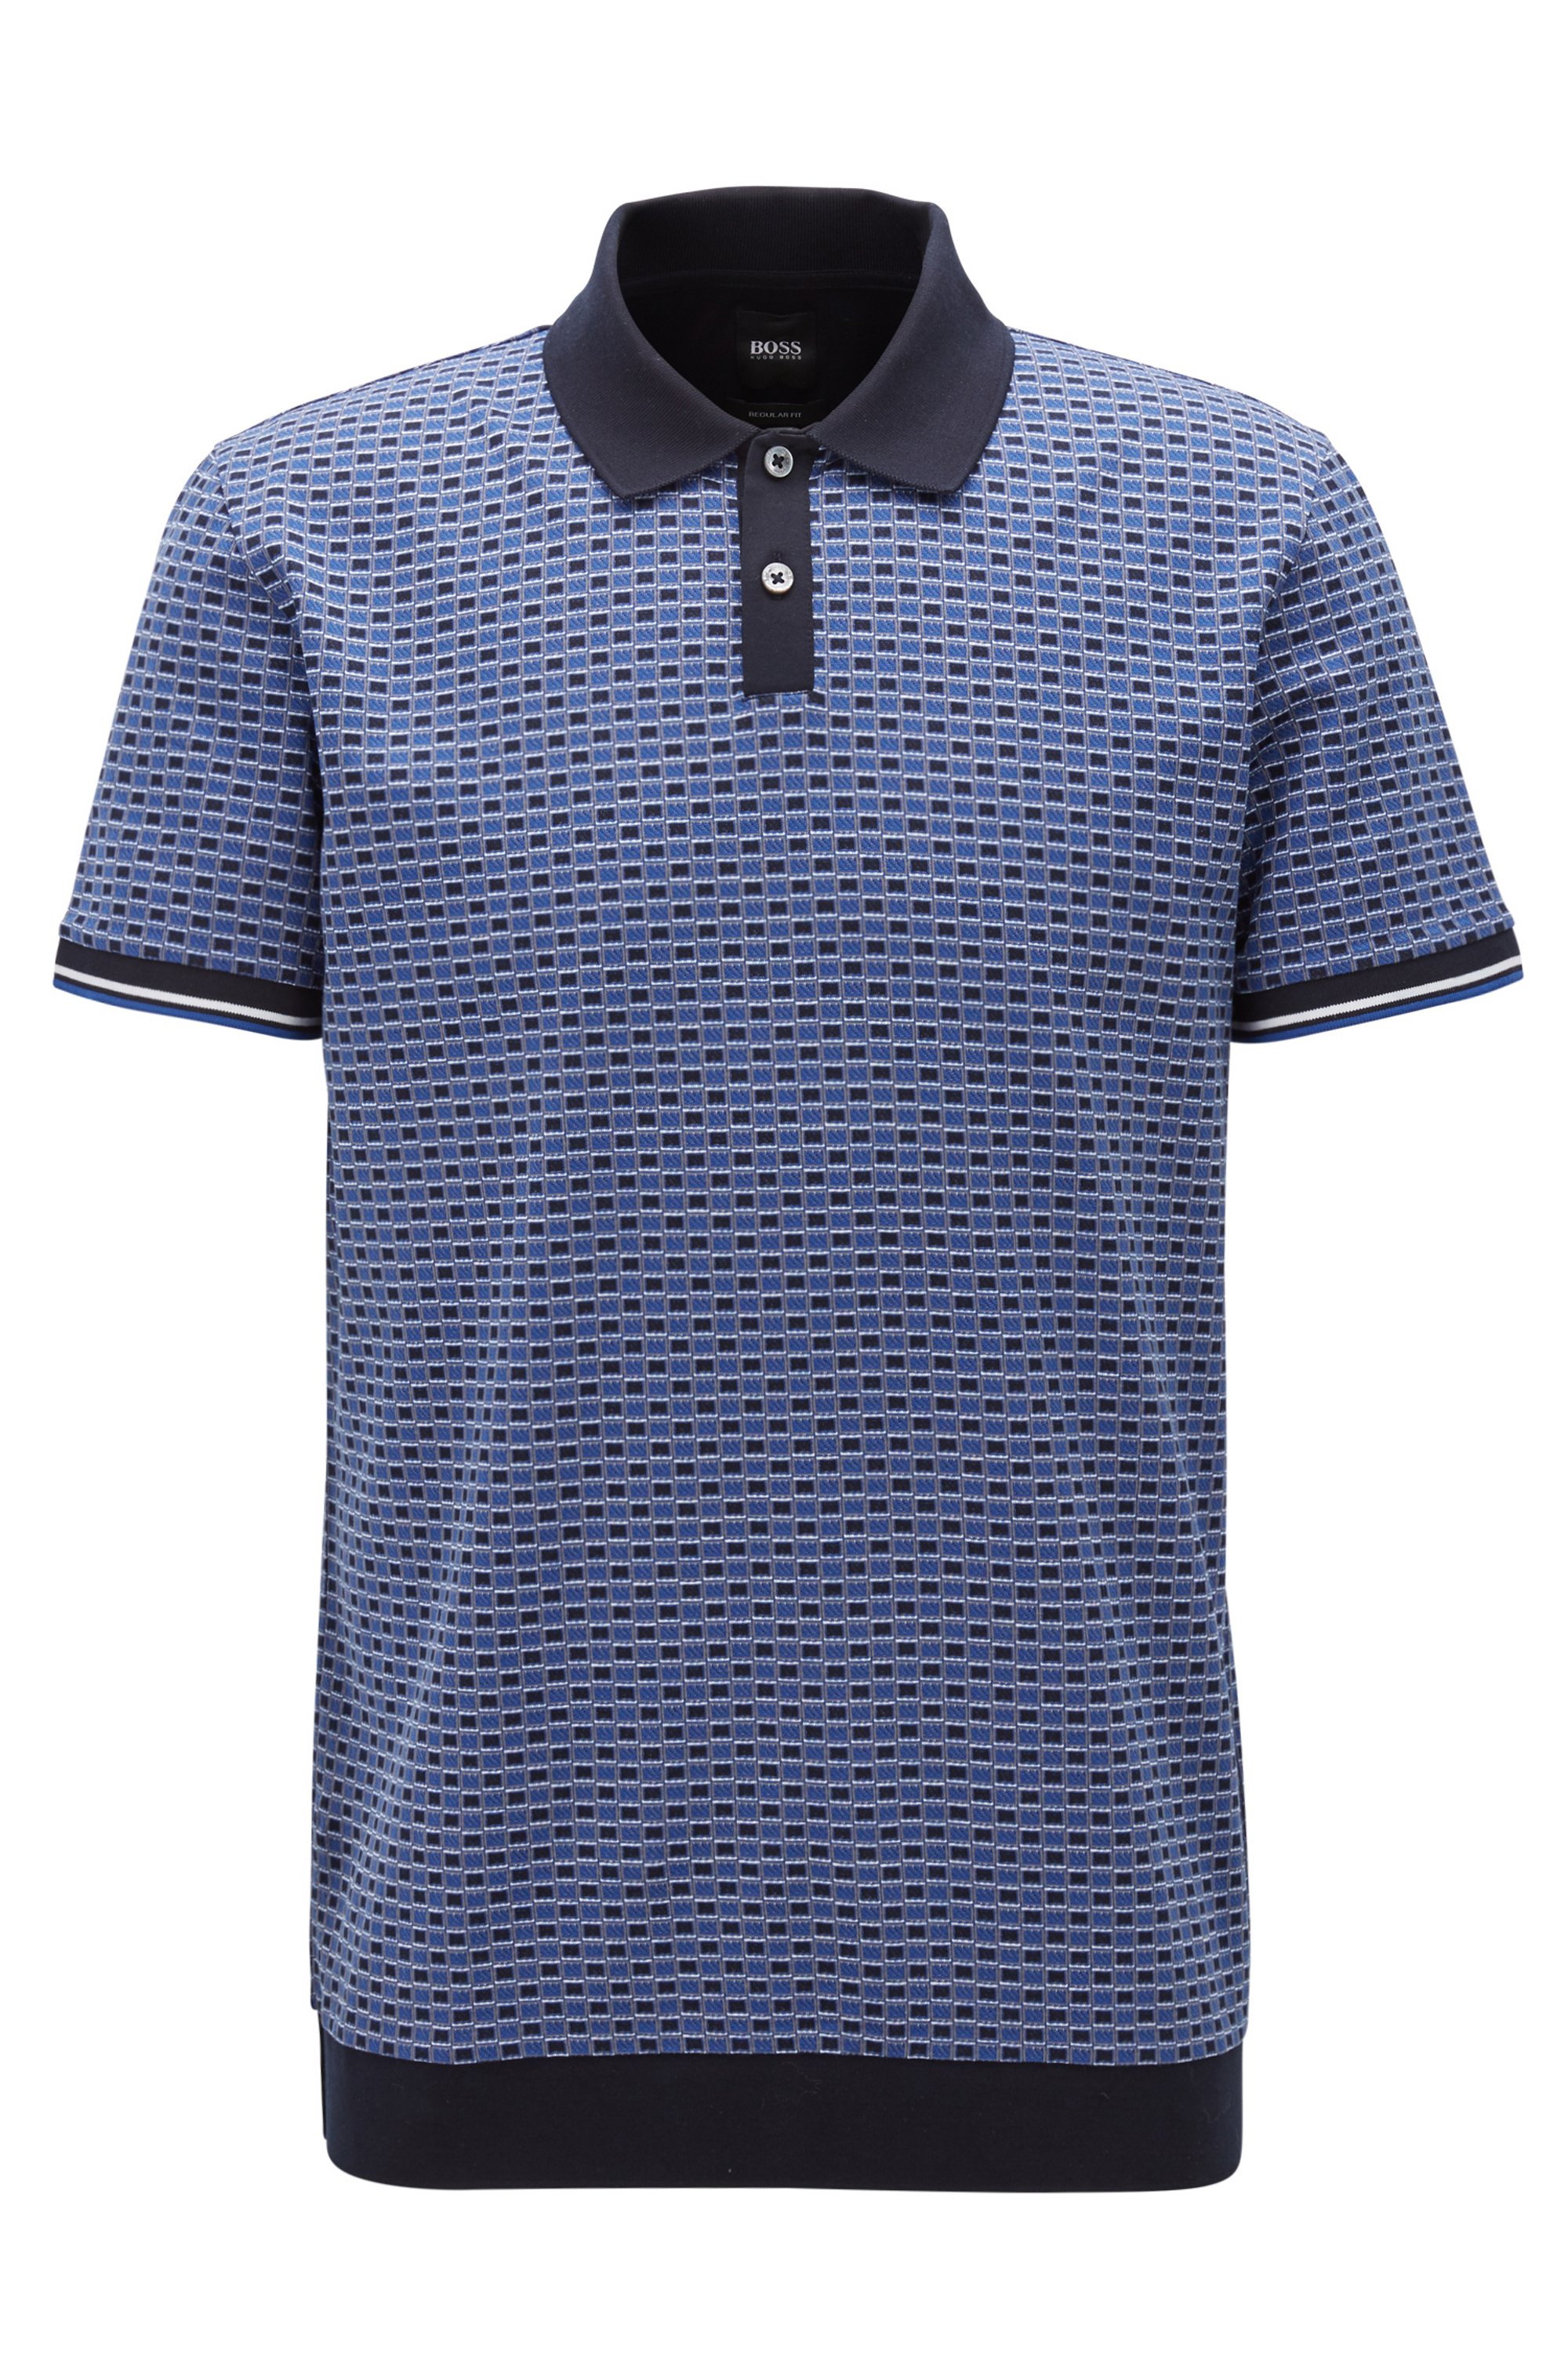 BOSS - Micro-patterned polo shirt in cotton jacquard